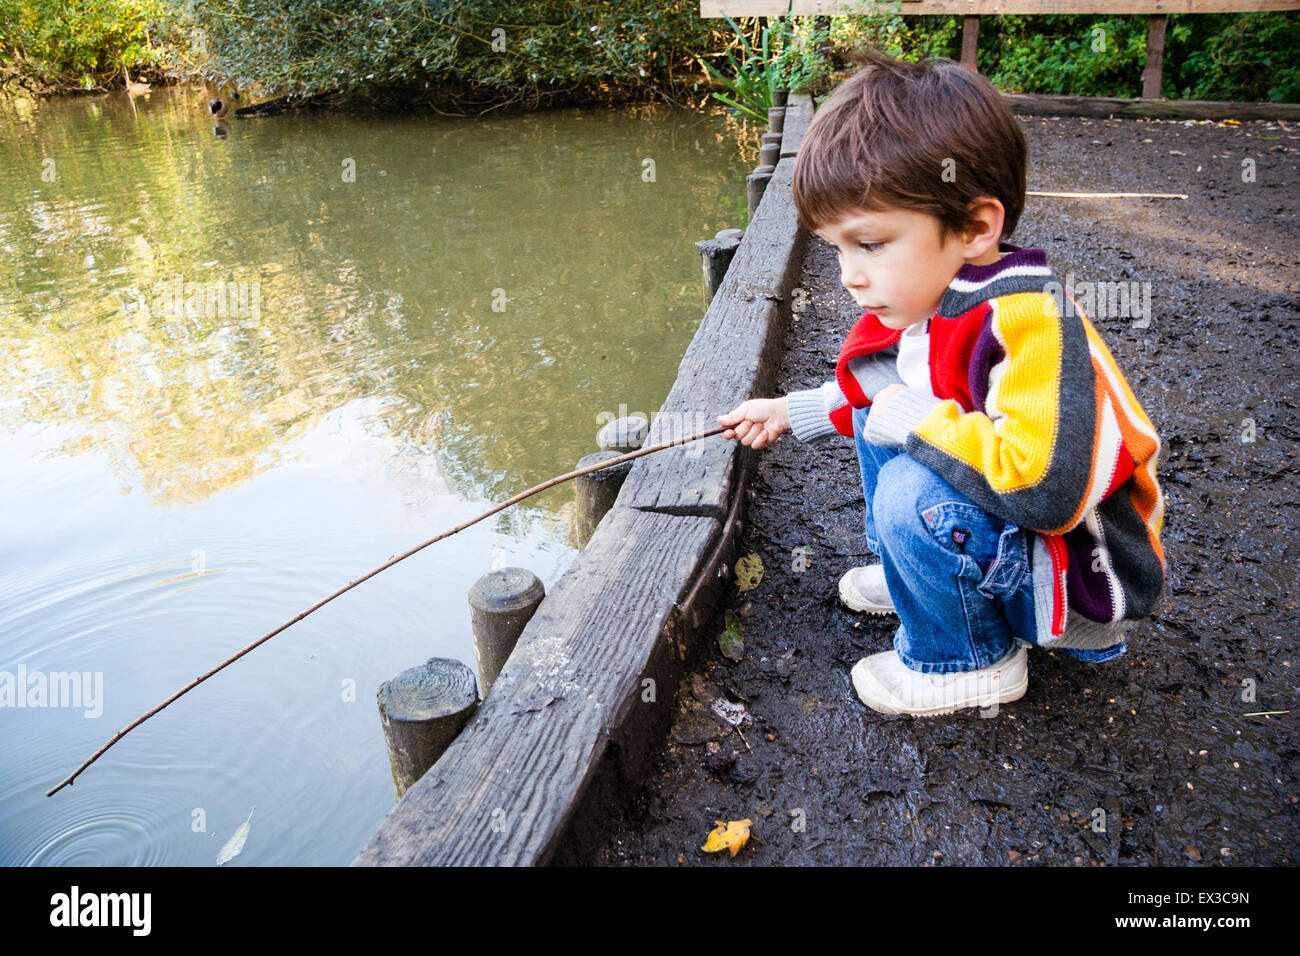 Child, boy, 4-5 year old, crouching down on dirt track by waterfront jetty  and holding stick as a fishing rod over still water of large pond Stock  Photo - Alamy